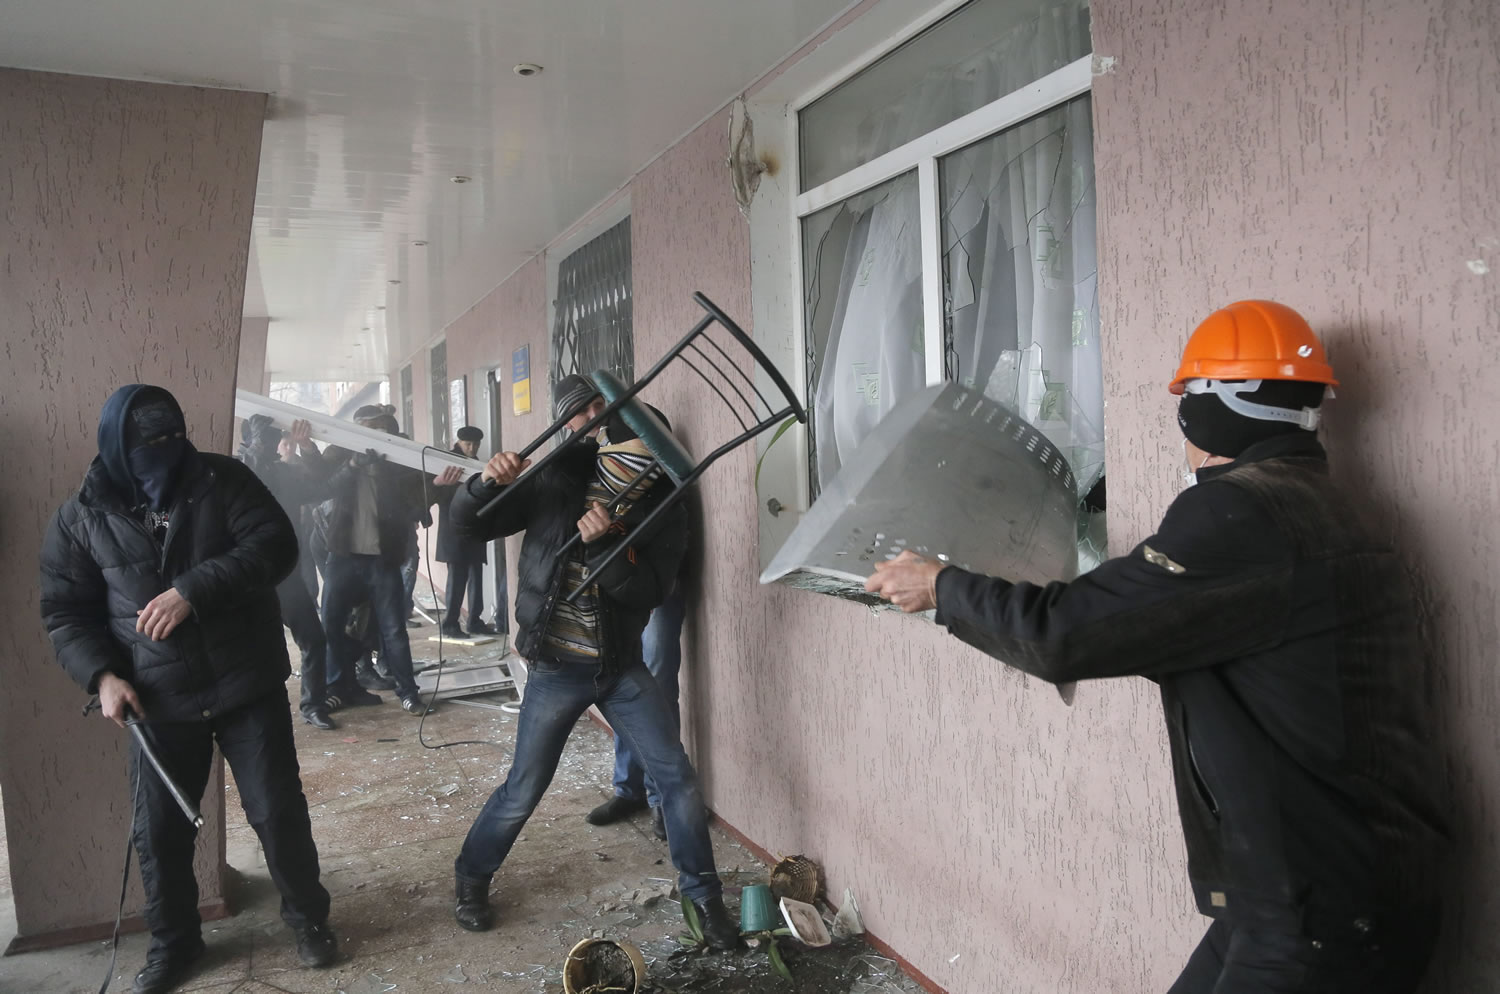 Pro-Russian men storm a police station Monday in the town of Horlivka in eastern Ukraine as the insurgency continues.